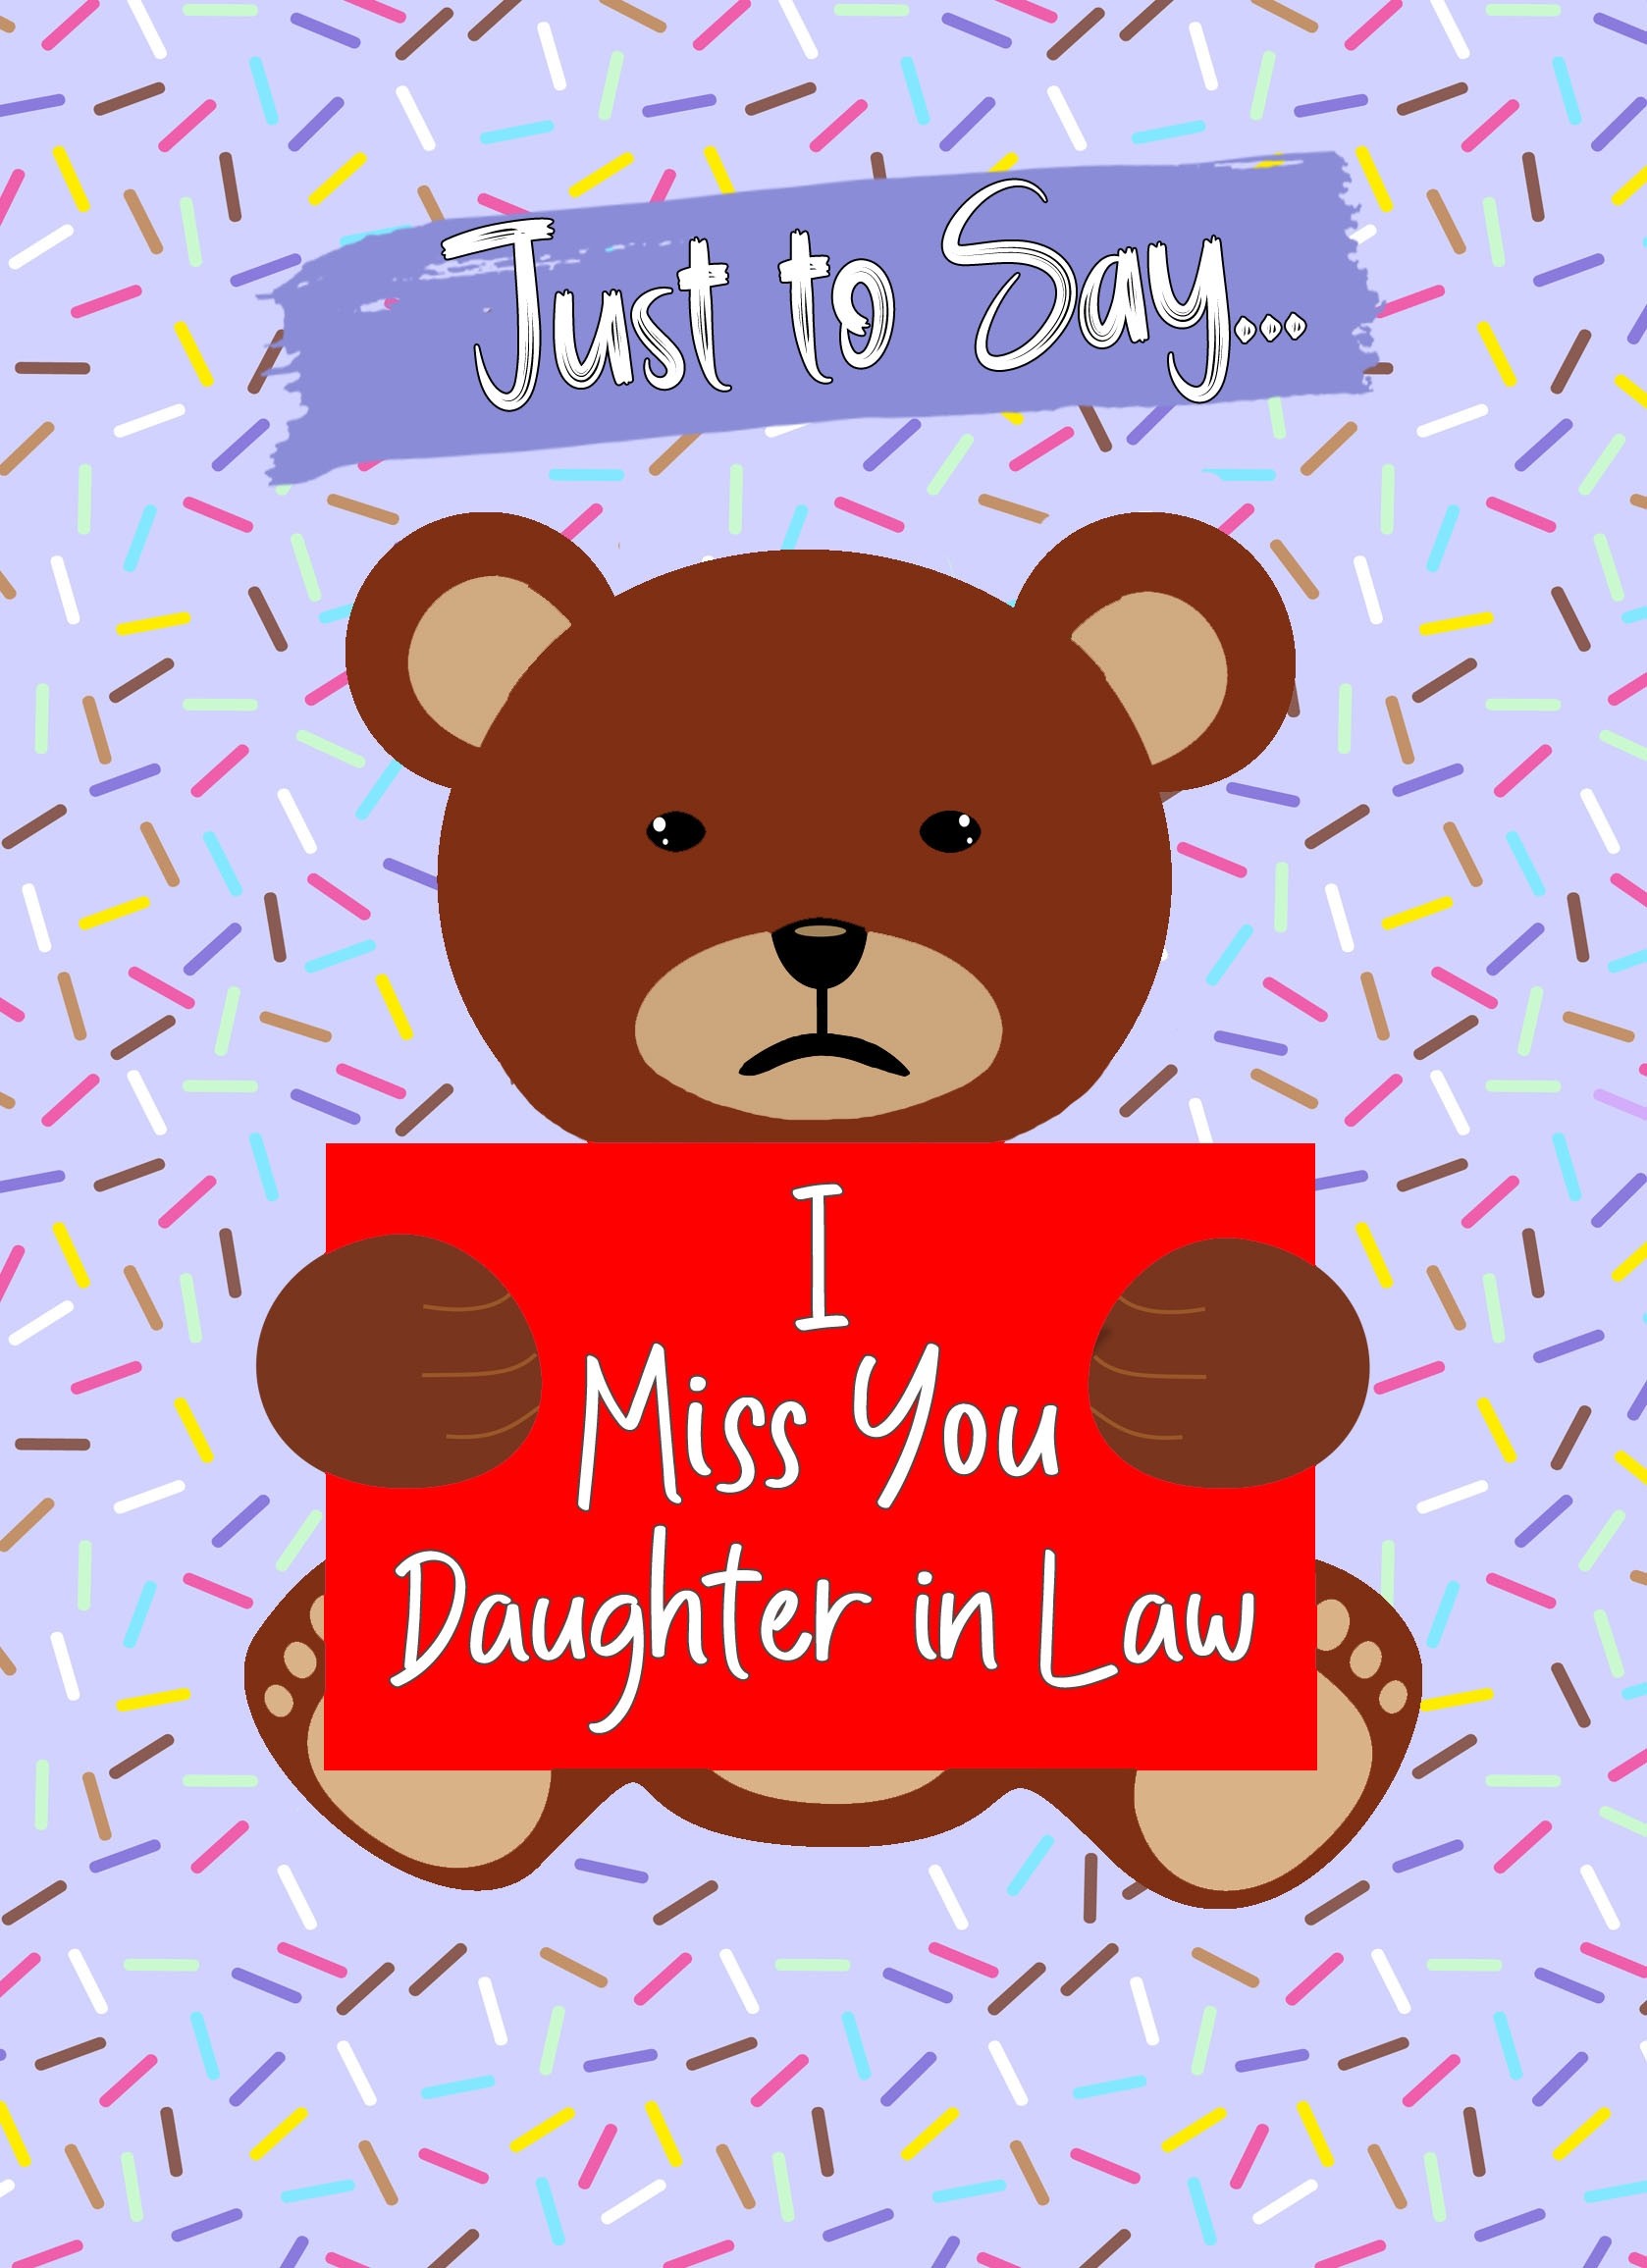 Missing You Card For Daughter in Law (Bear)